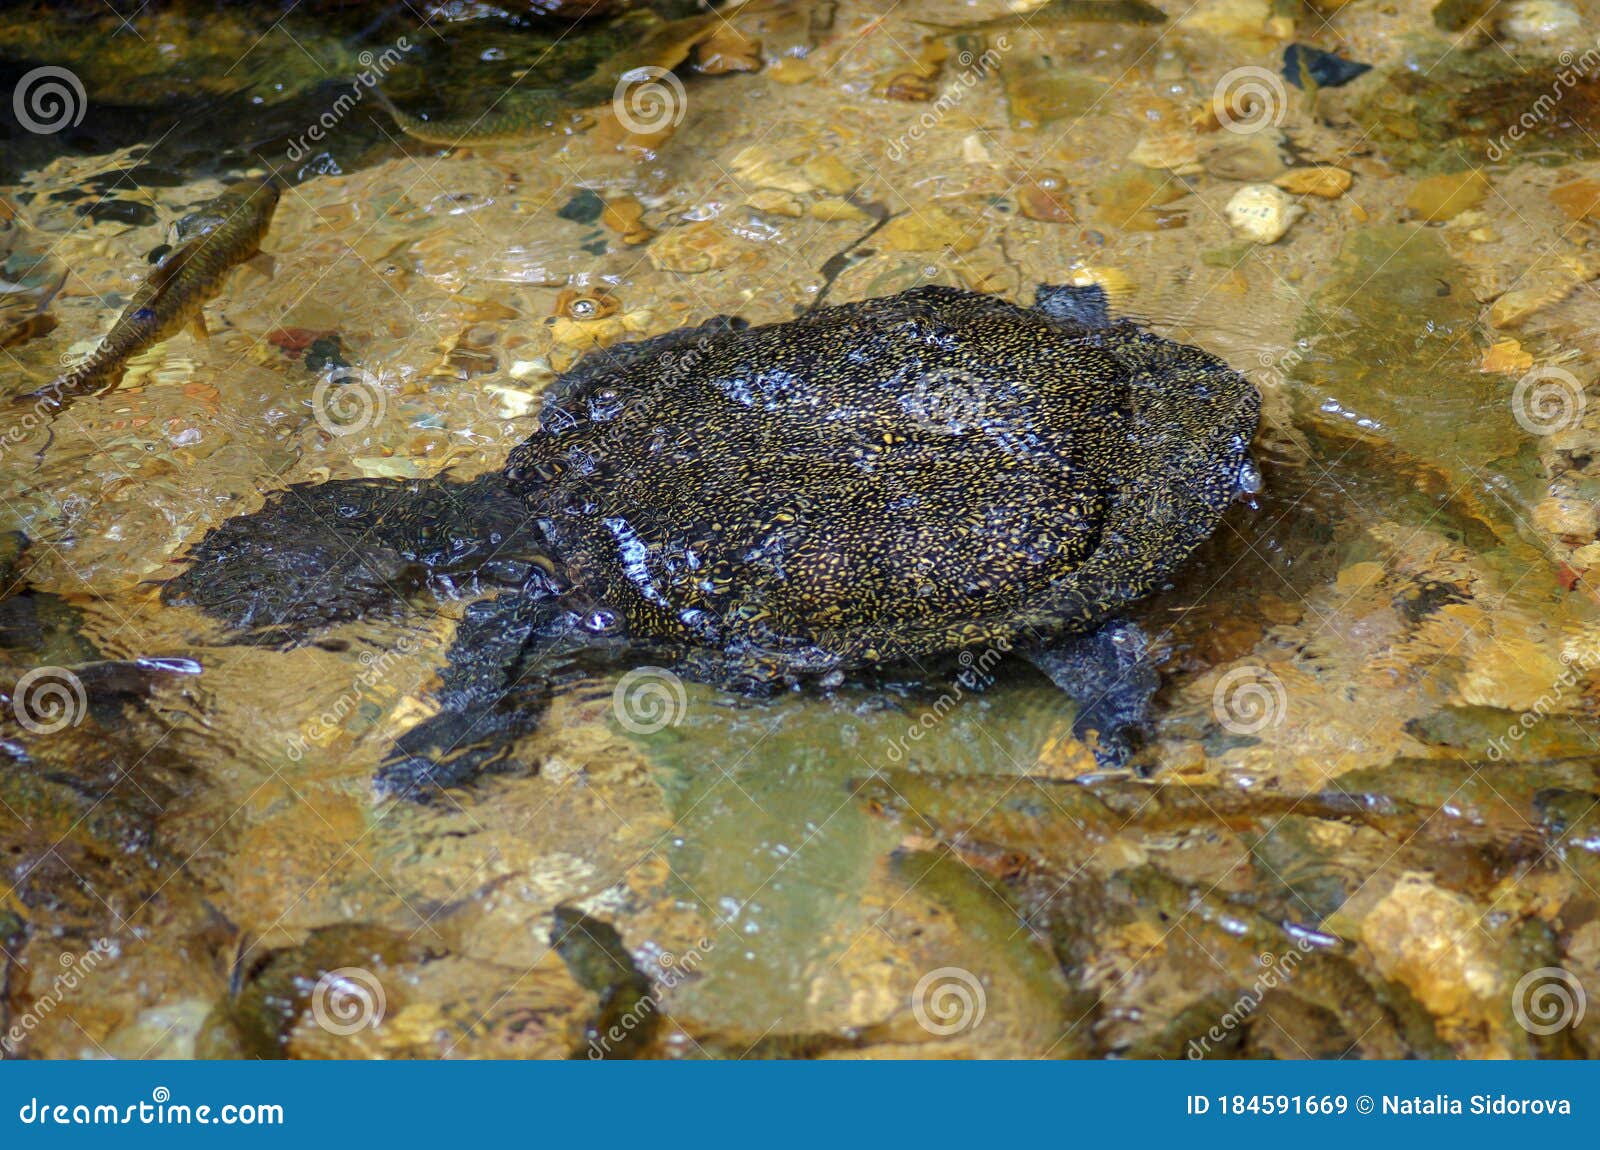 Chinese Softshell Turtle in the National Park on Koh Chang Island, Thailand  Stock Image - Image of tortoise, animal: 184591669